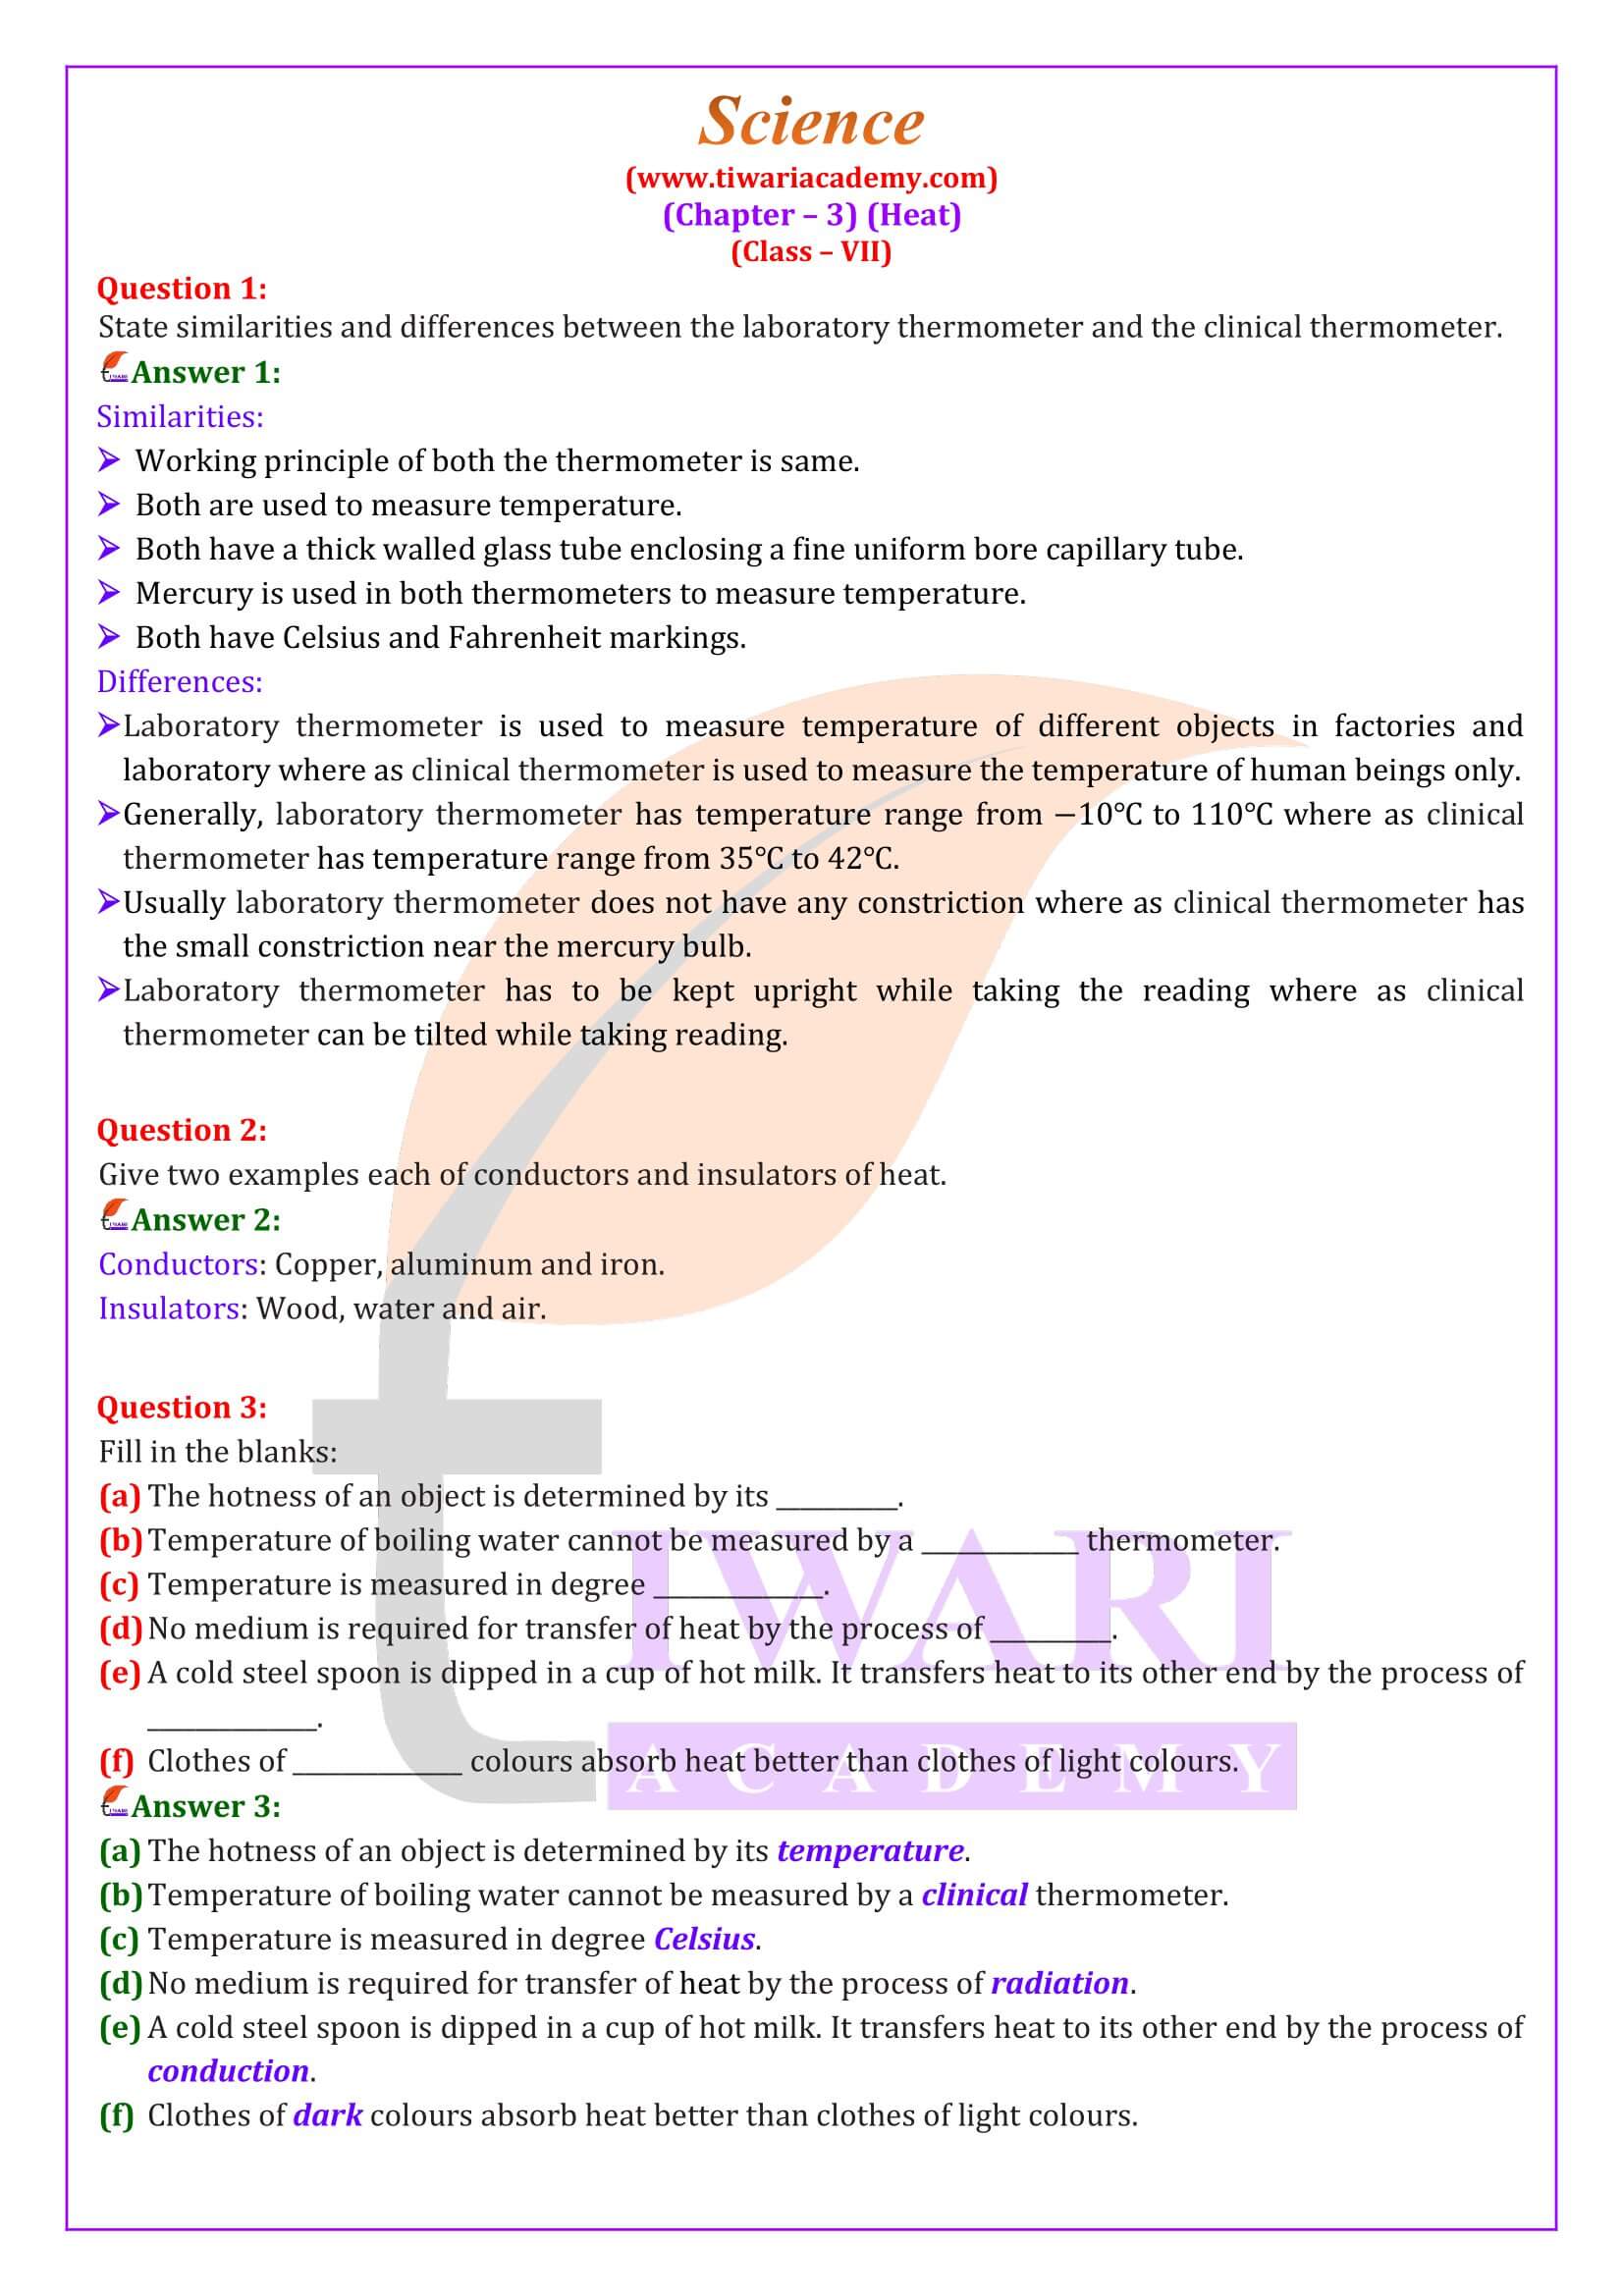 NCERT Solutions for Class 7 Science Chapter 3